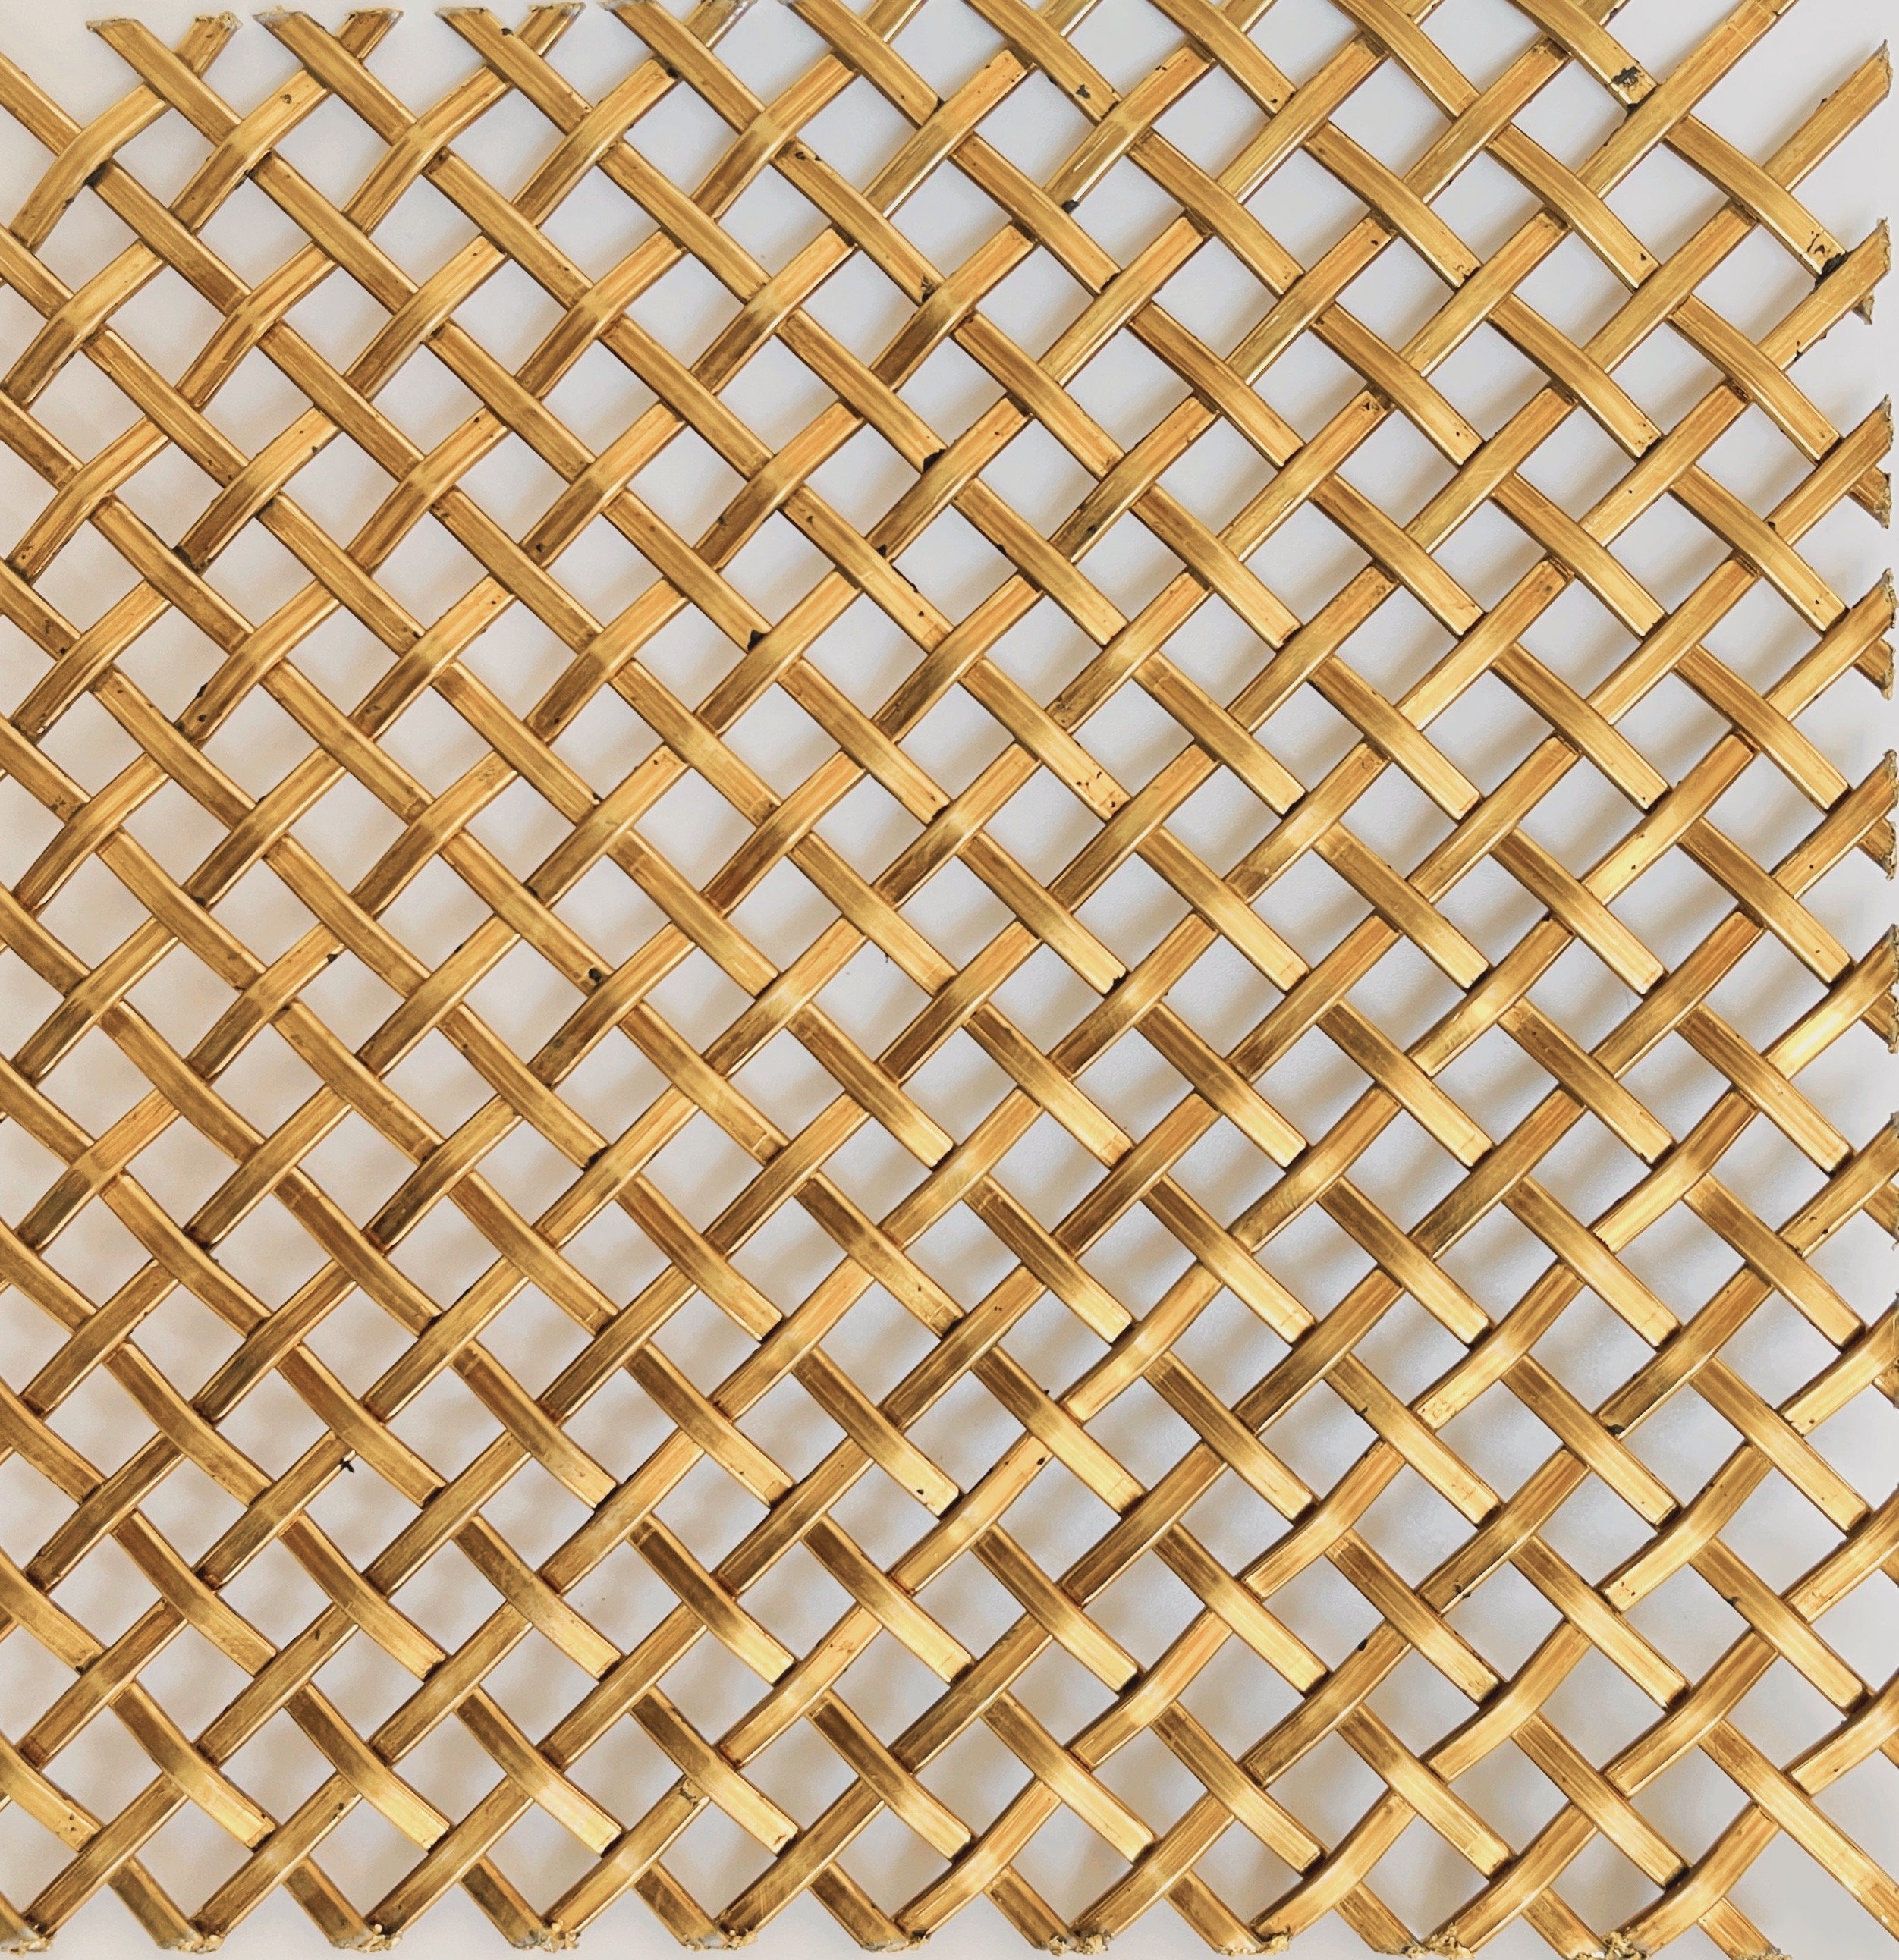 Wire Mesh Burnished Brass Architectural Woven Furniture and